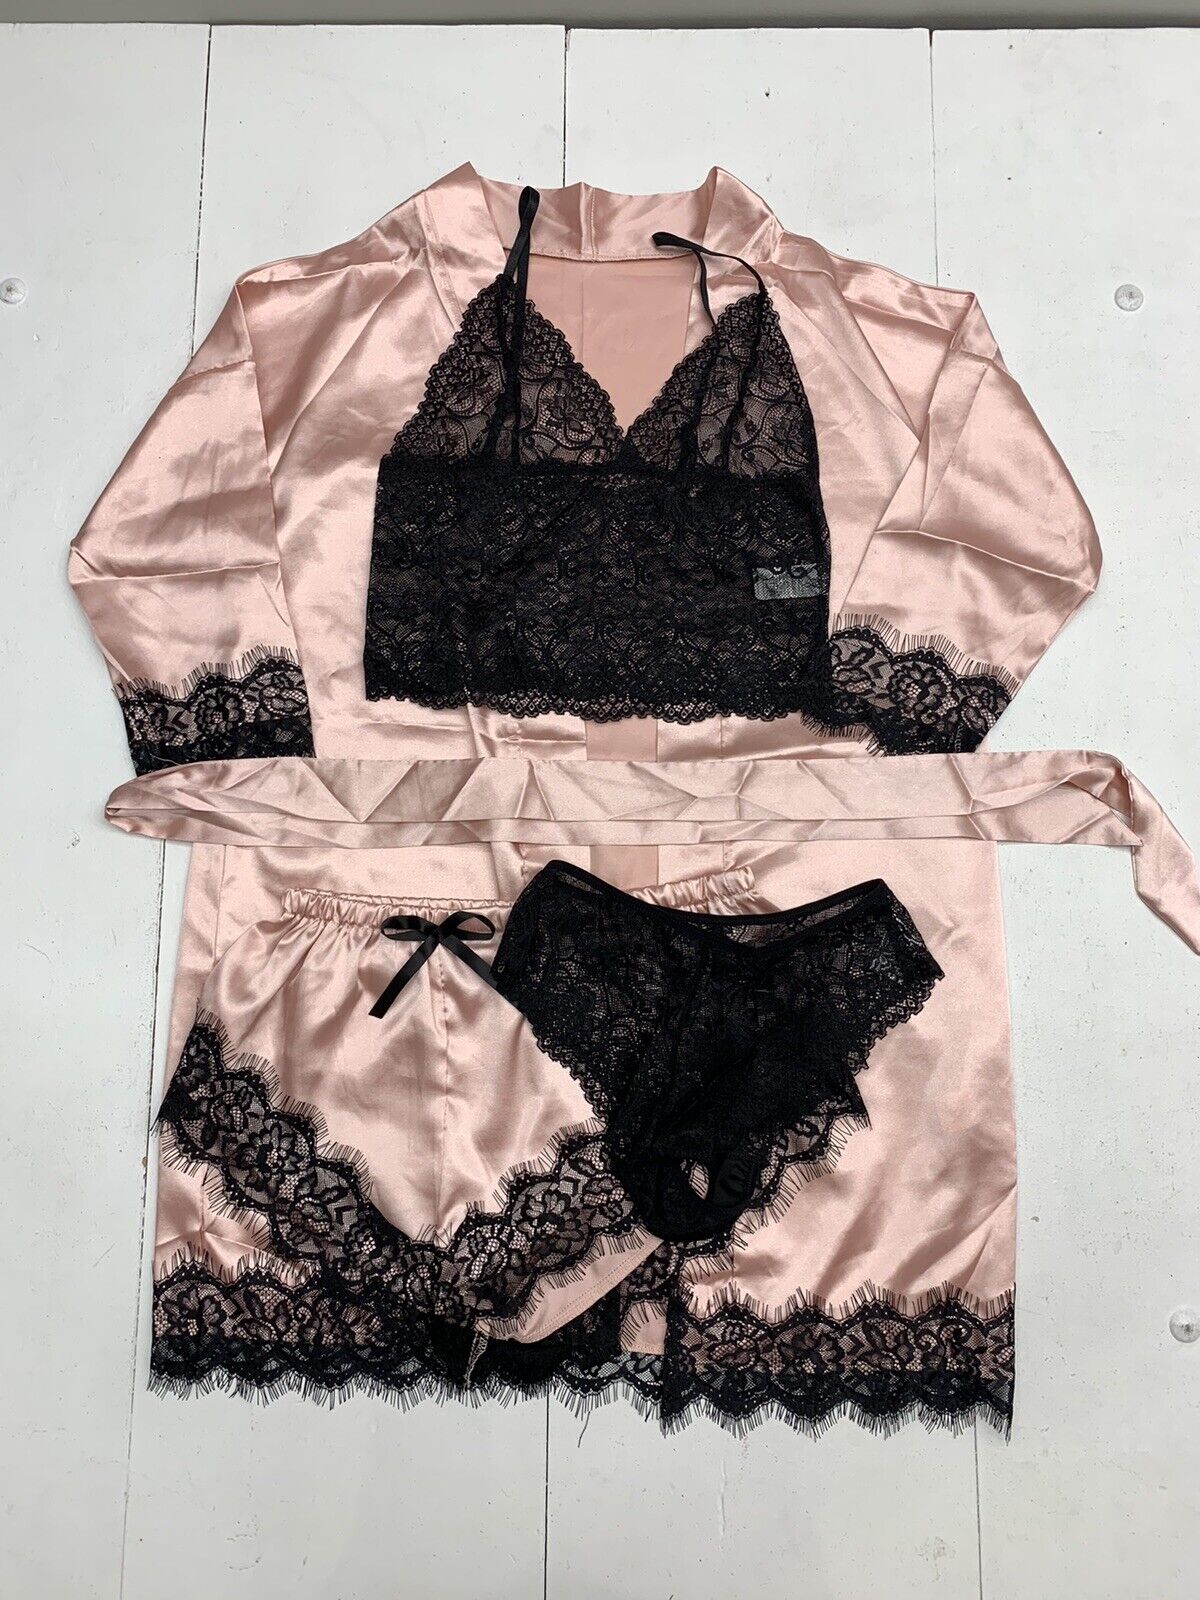 Shein Womens 5 Piece Pink Black Lingerie Set Size Small - beyond exchange